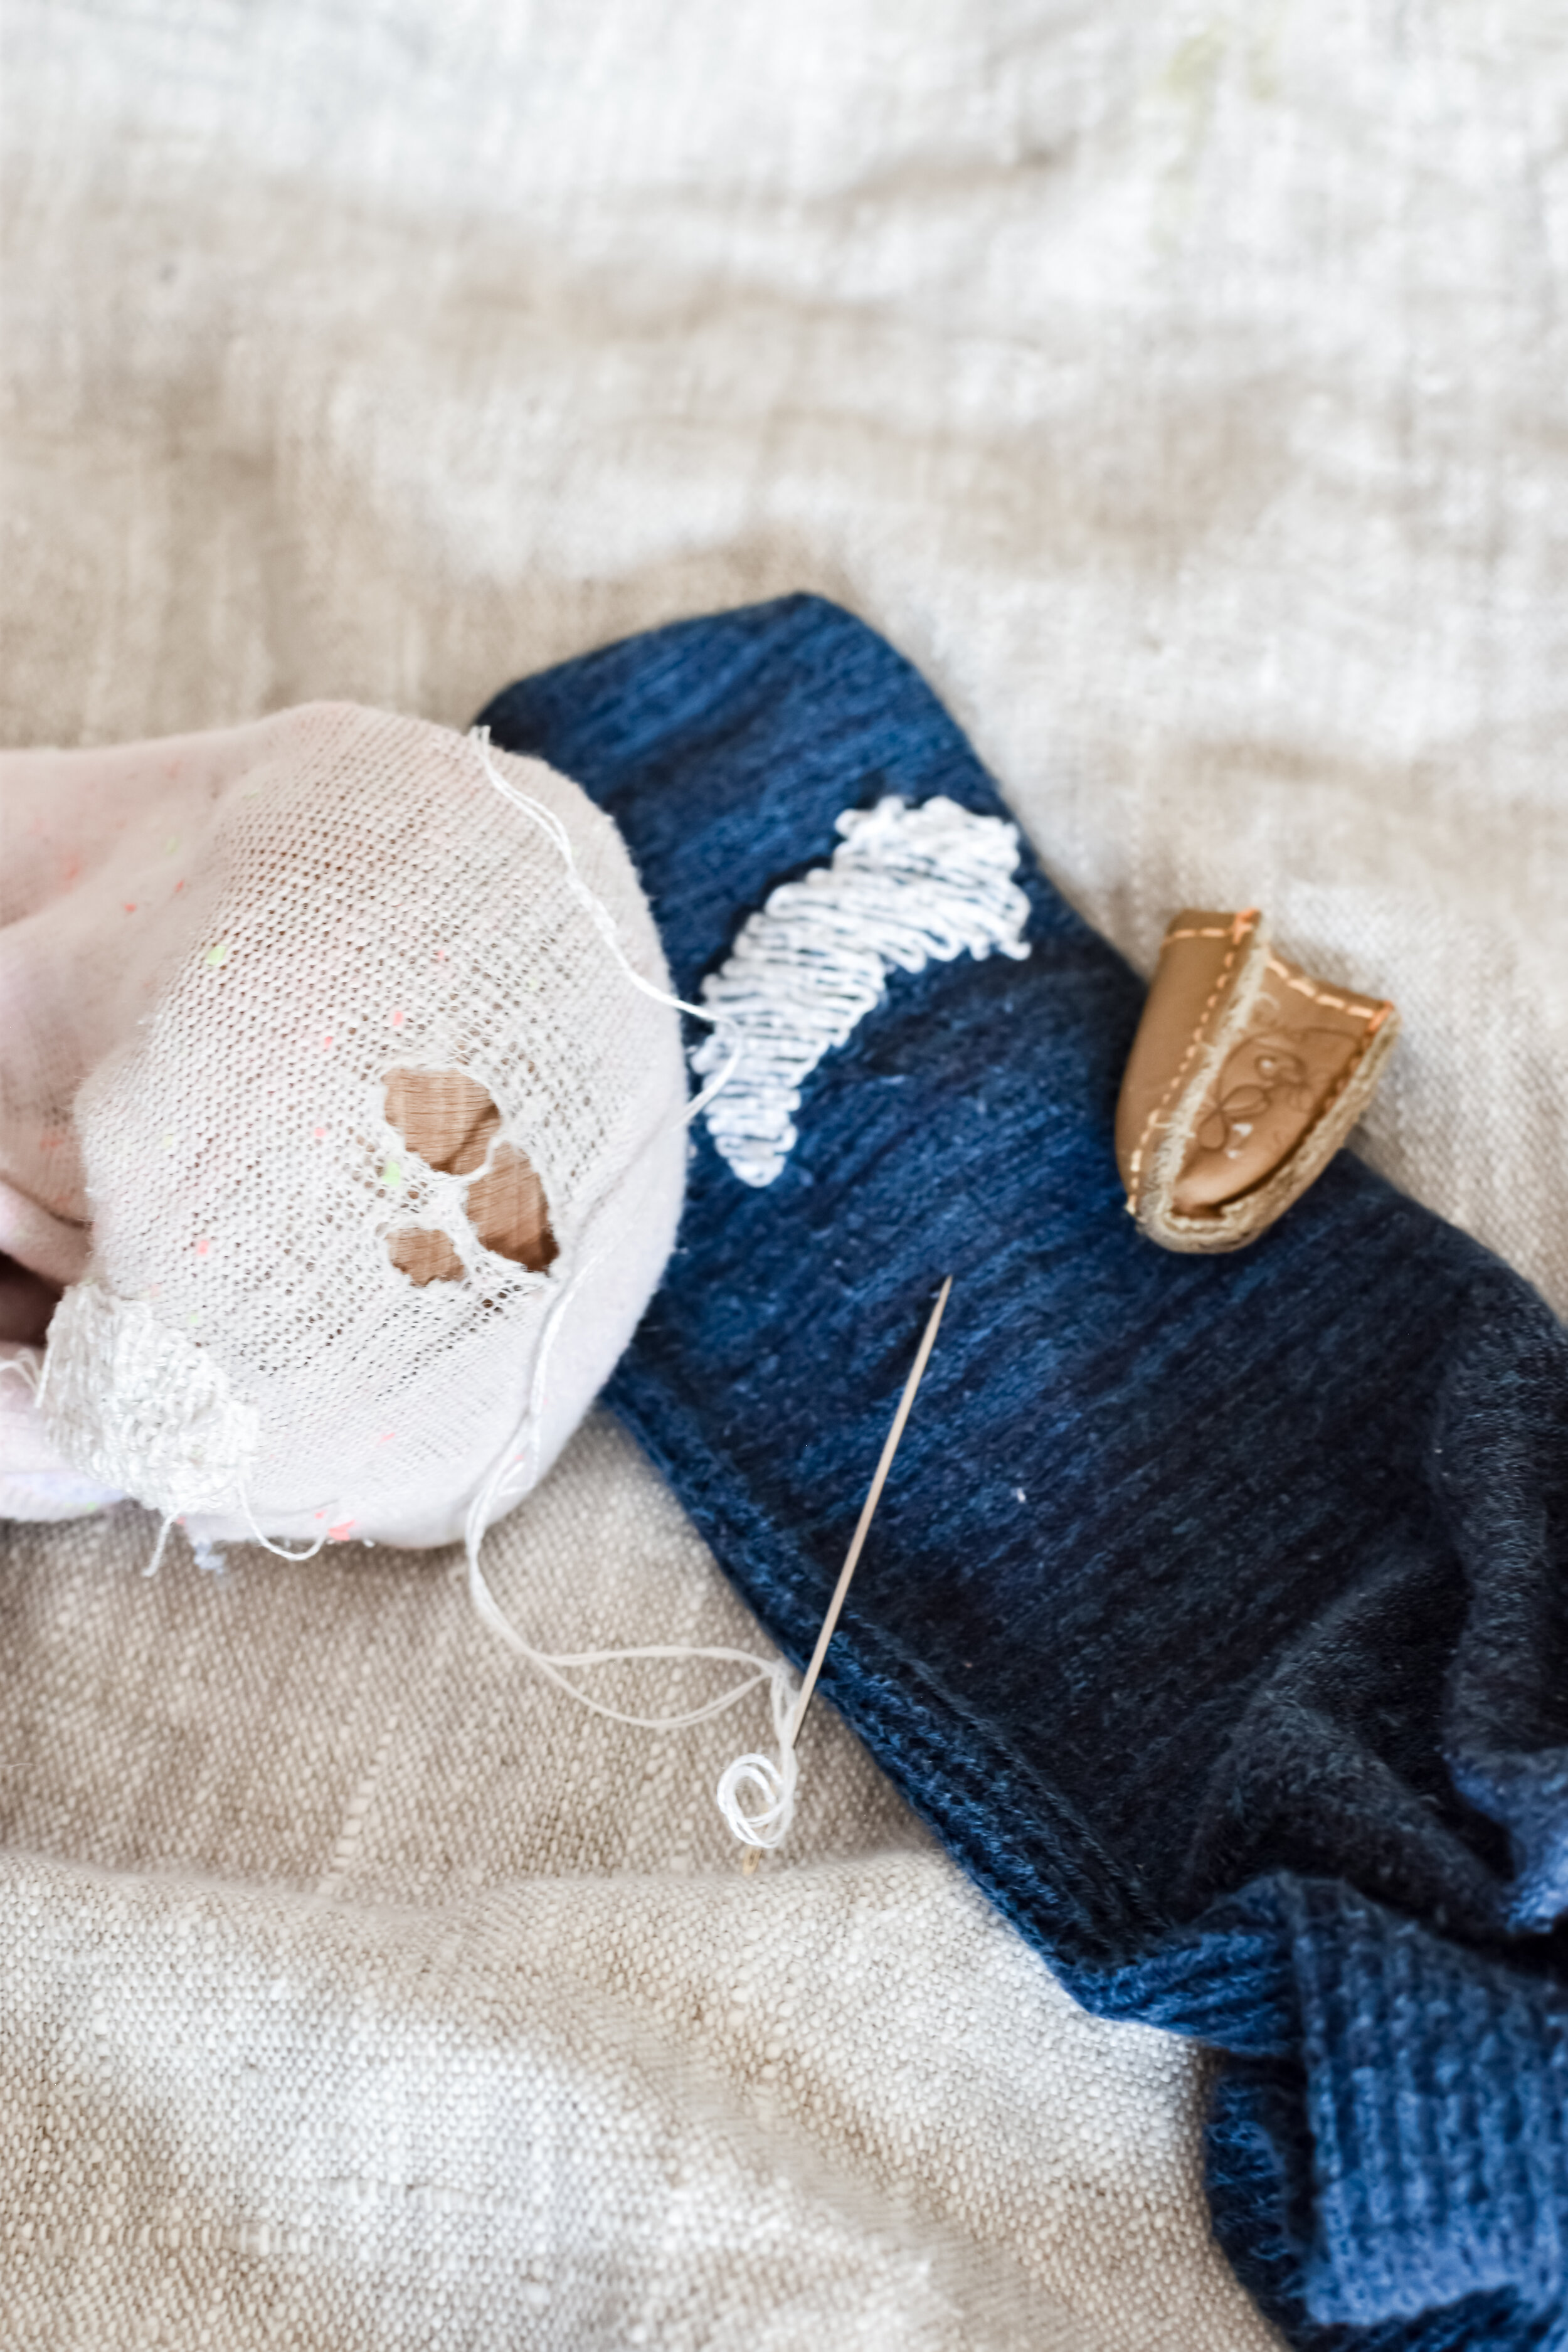 How to Mend Socks with a Darning Egg (or Mushroom)